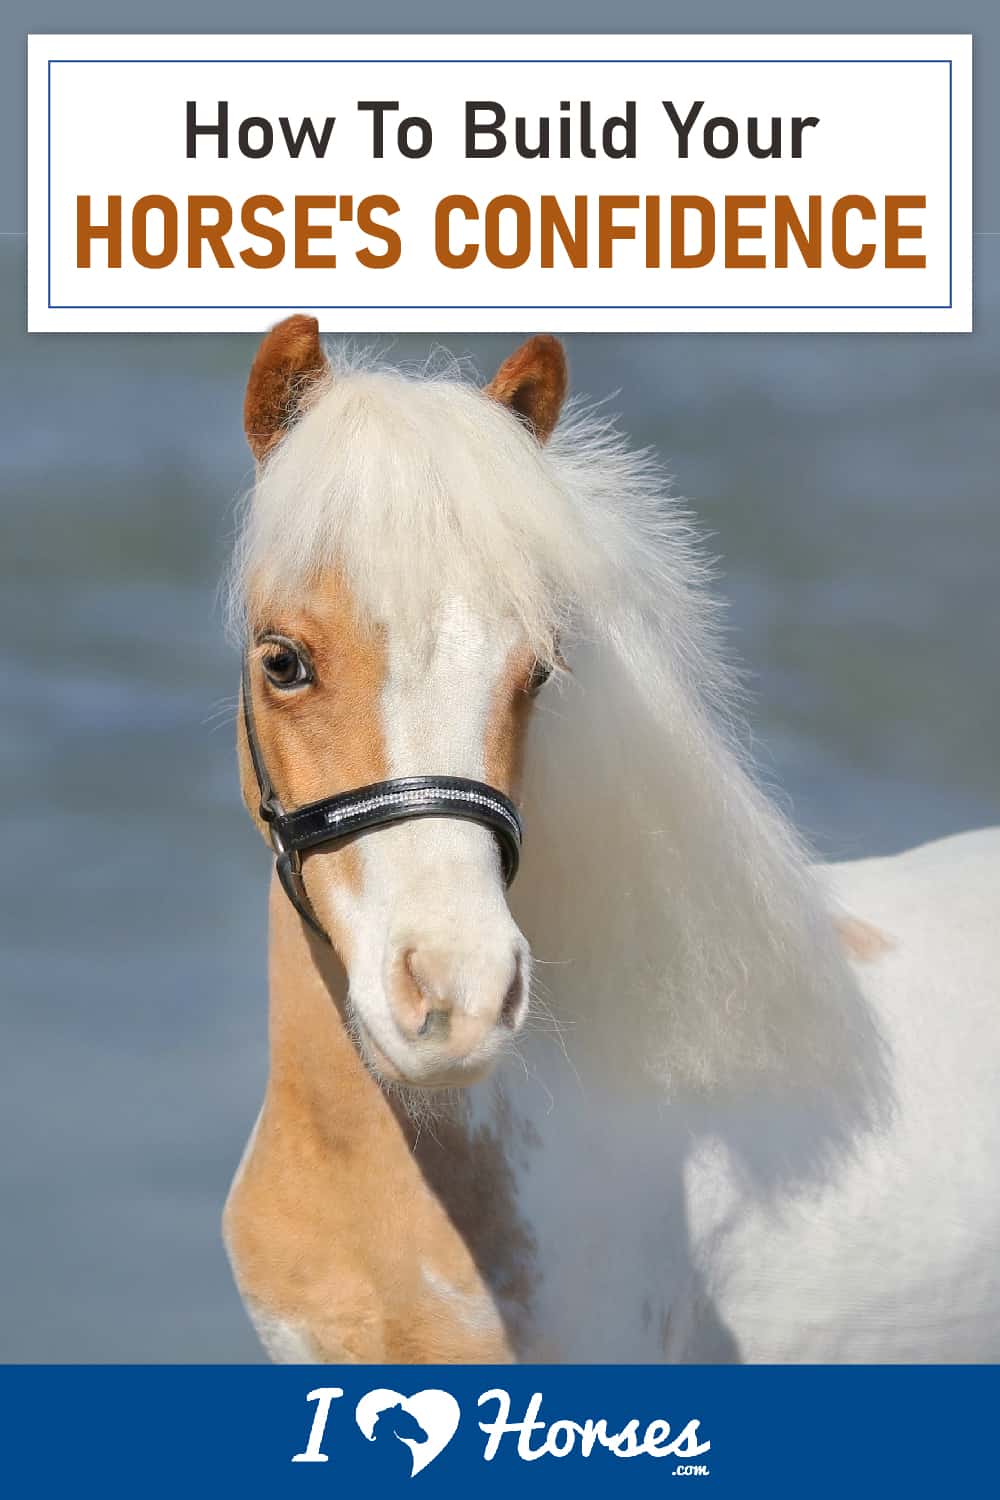 How To Build Your Horse's Confidence